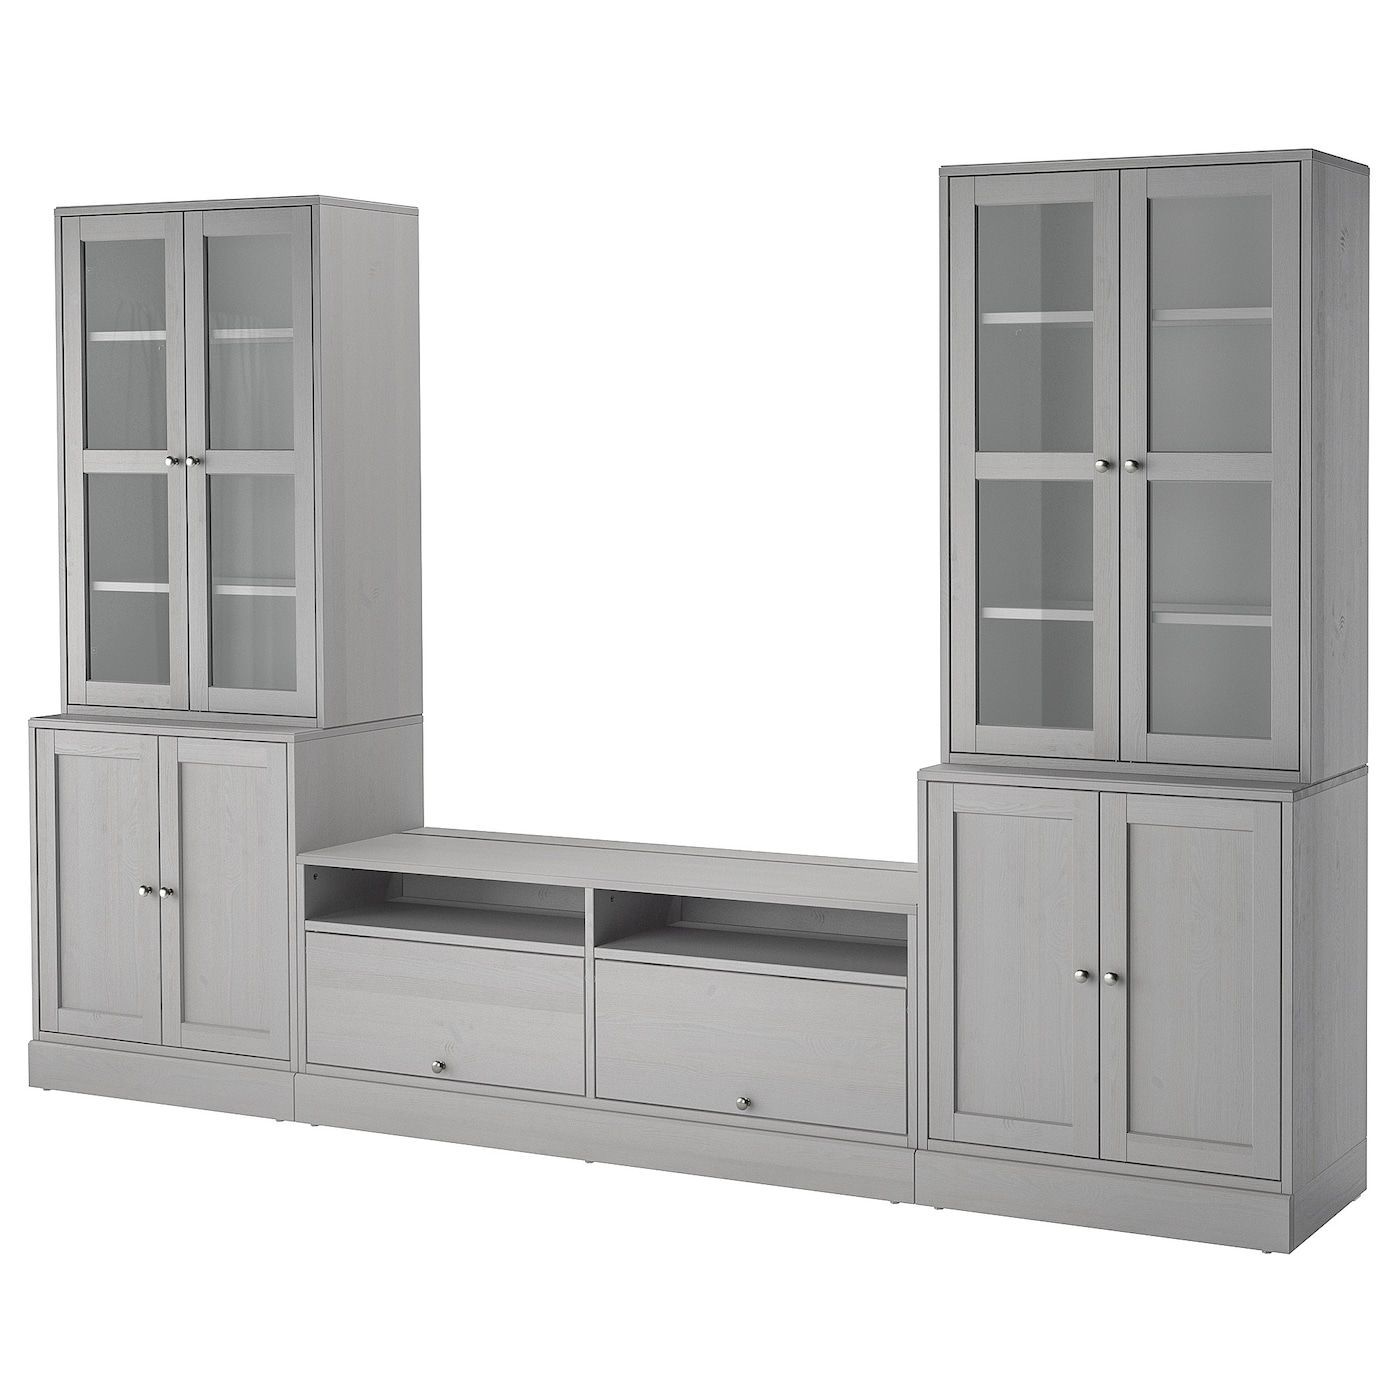 Ikea Us – Furniture And Home Furnishings | Tv Storage Regarding Ikea Built In Tv Cabinets (Photo 14 of 15)